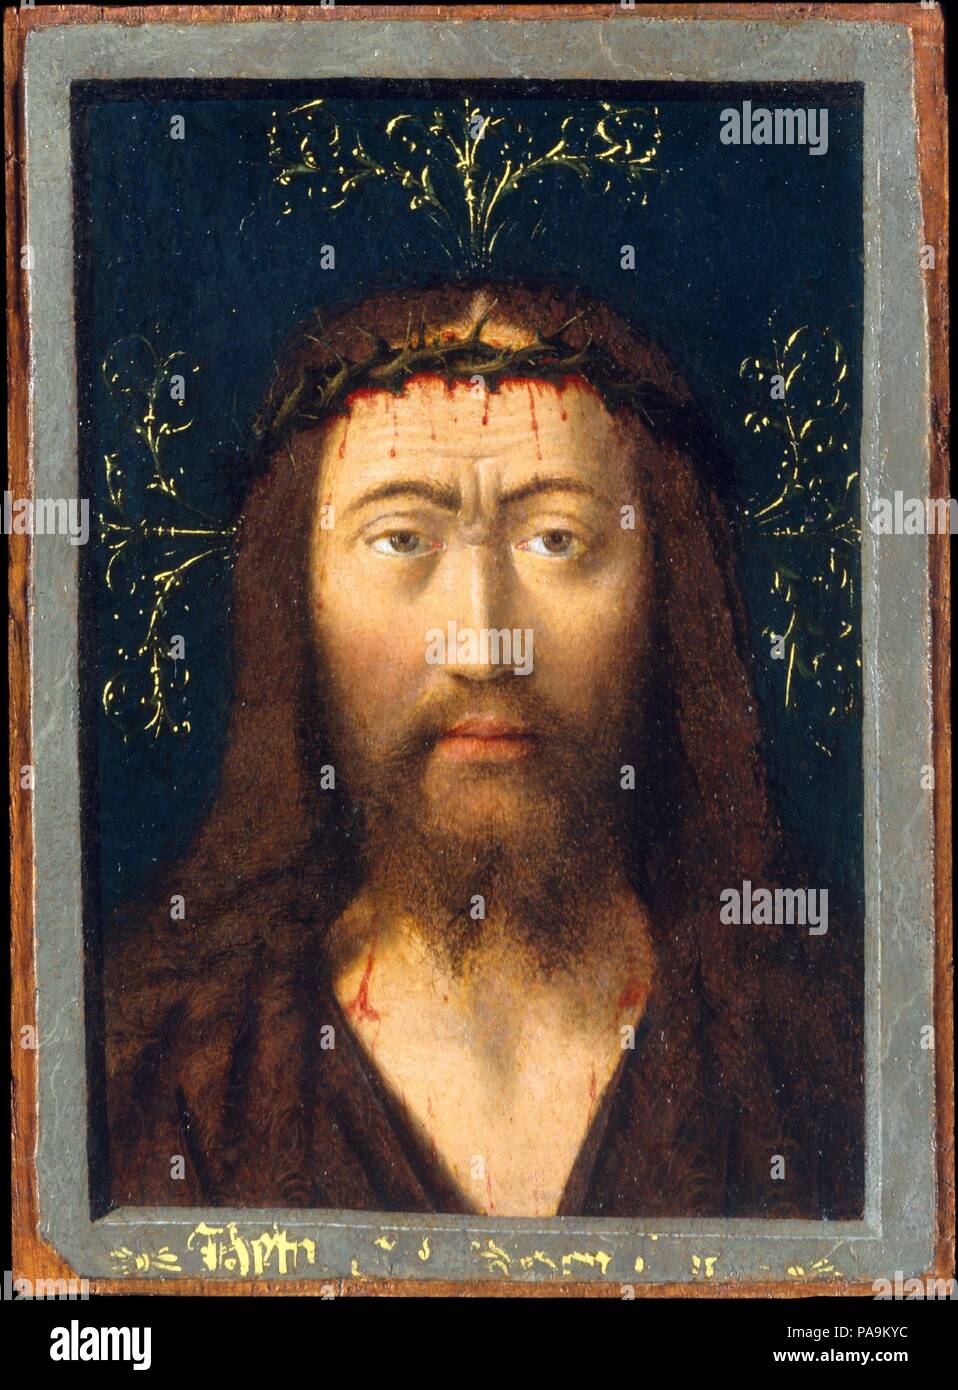 Head of Christ. Artist: Petrus Christus (Netherlandish, Baarle-Hertog  (Baerle-Duc), active by 1444-died 1475/76 Bruges). Dimensions: Overall 5  7/8 x 4 1/4 in. (14.9 x 10.8 cm); parchment 5 3/4 x 4 1/8